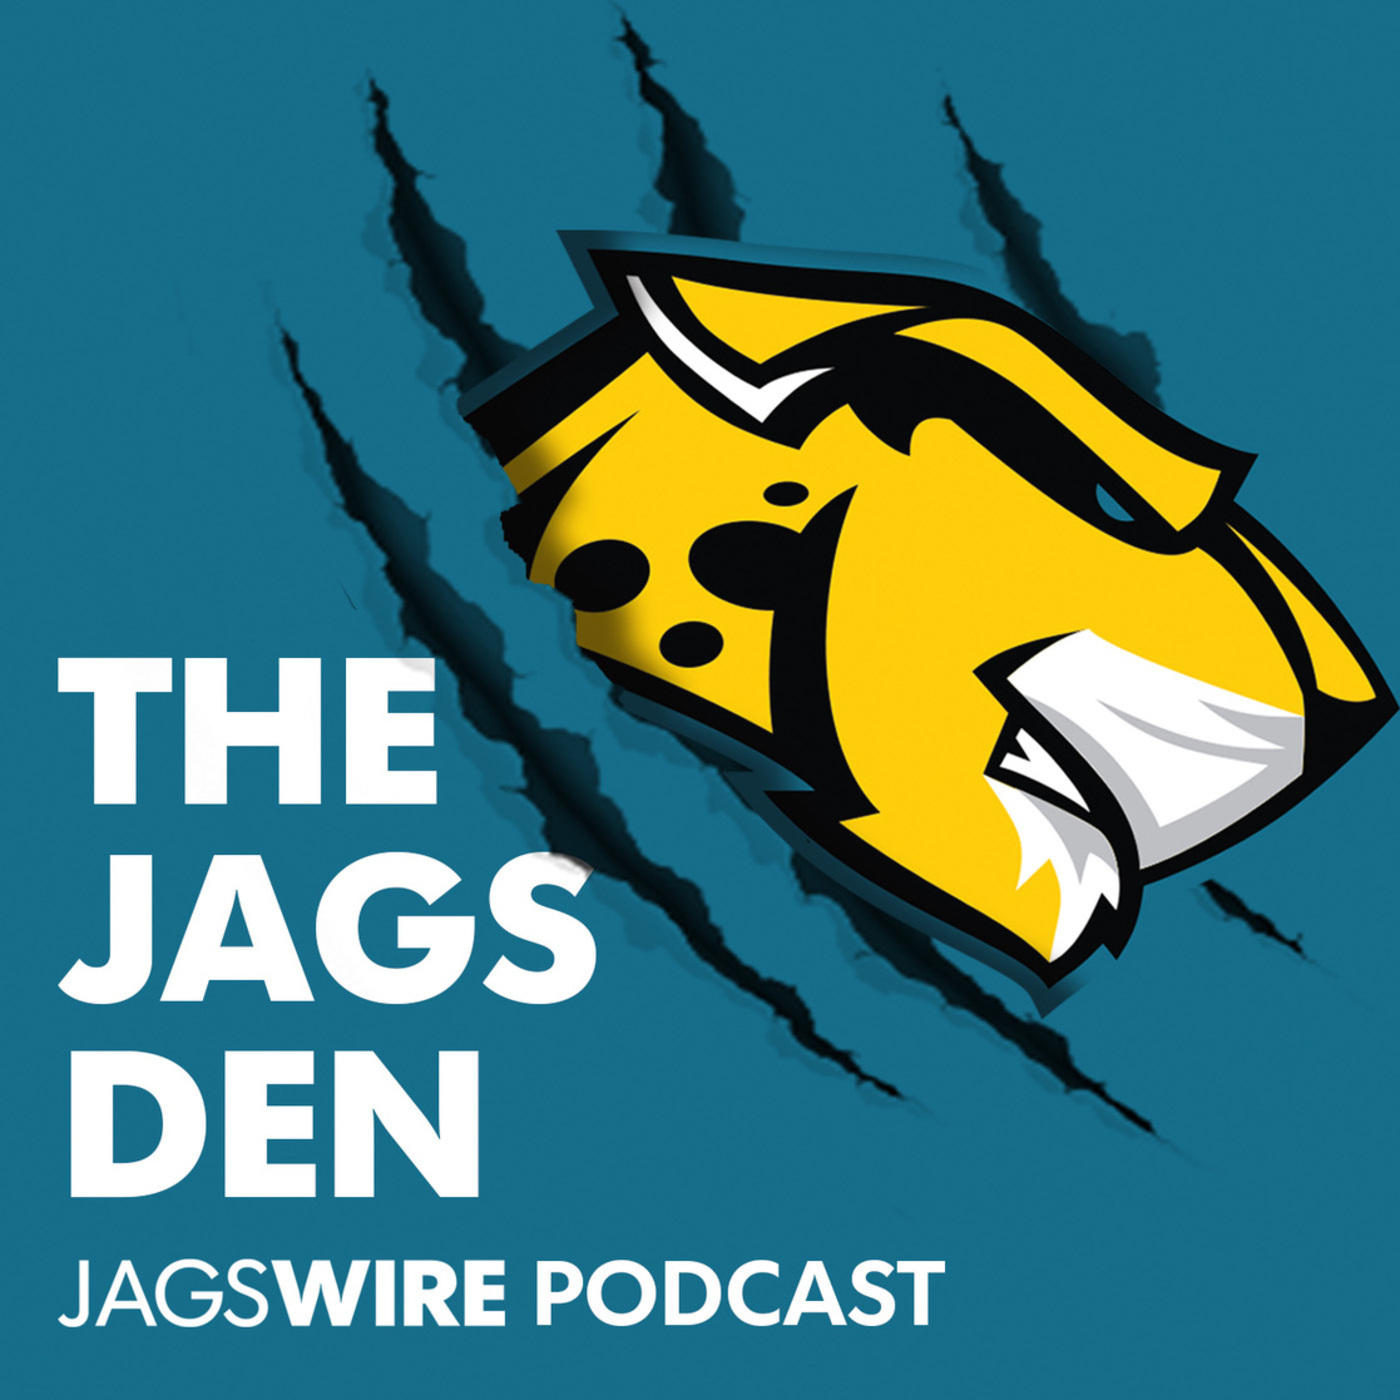 Jags Den Podcast Ep. 37: Discussion on the addition of Nick Foles on Day 1 of the tampering period, and the Jags' needs after QB